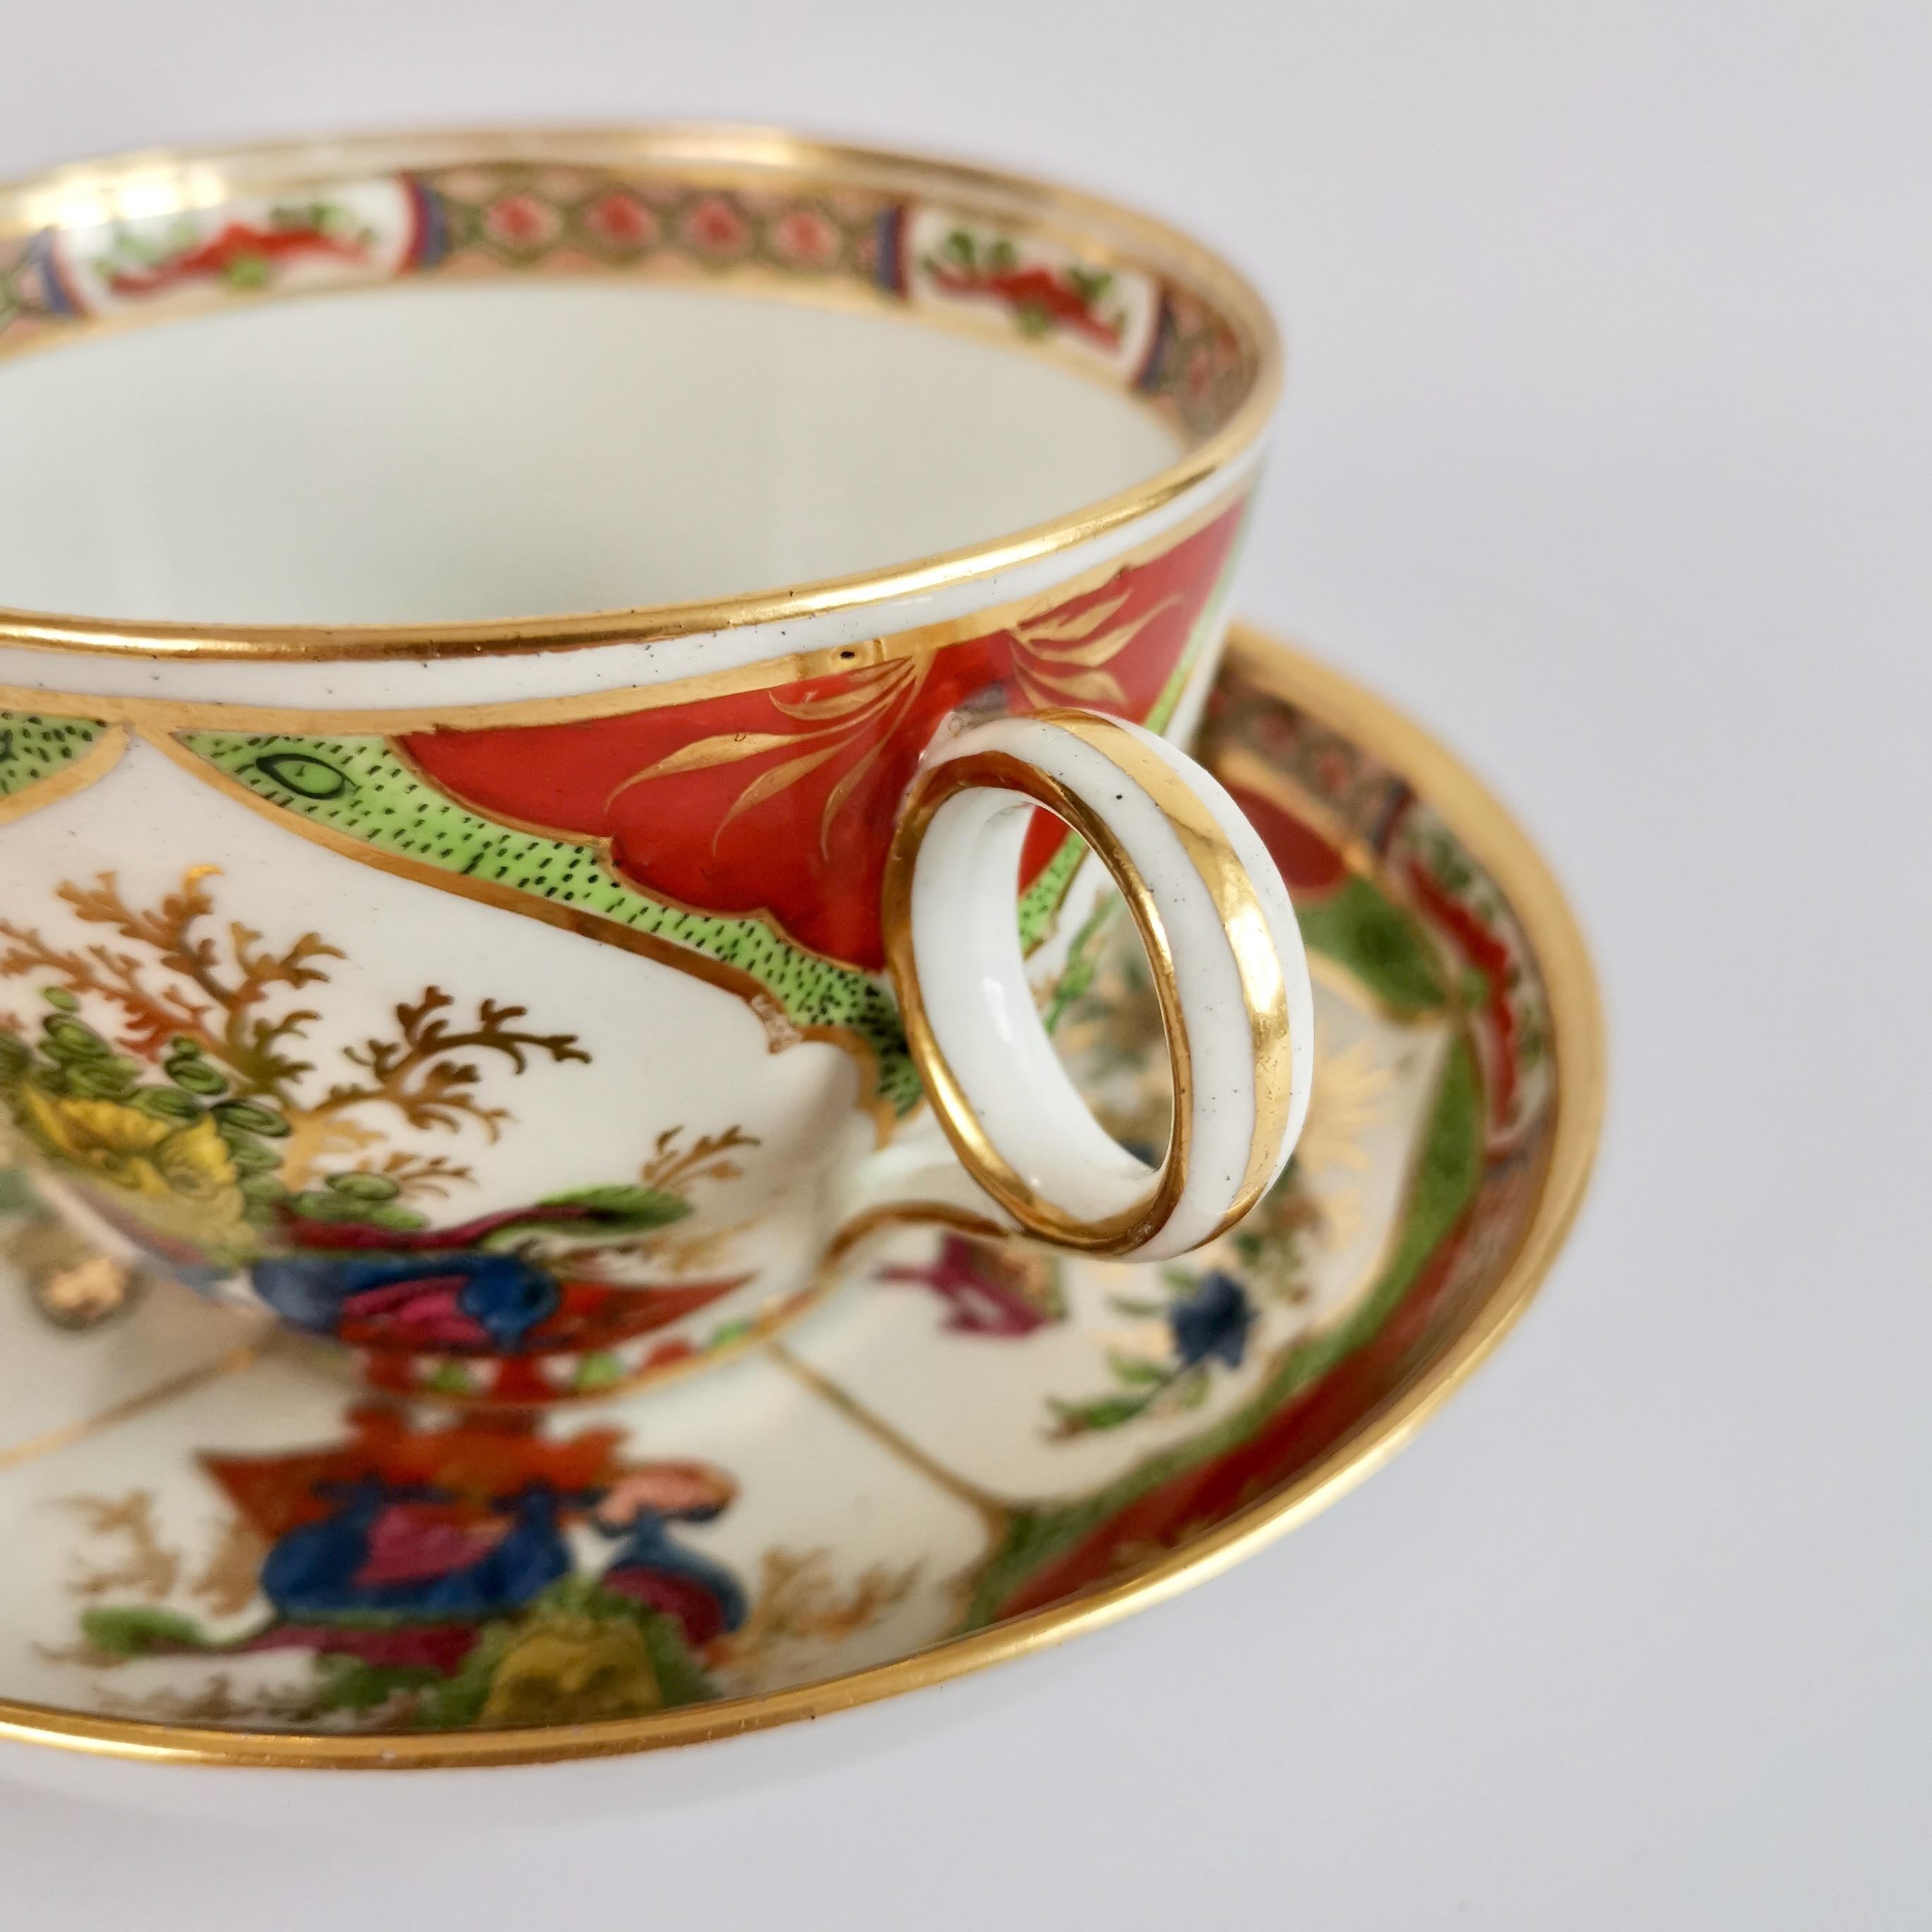 Chamberlains Worcester Porcelain Breakfast Cup, Dragons in Compartments, Ca 1800 8